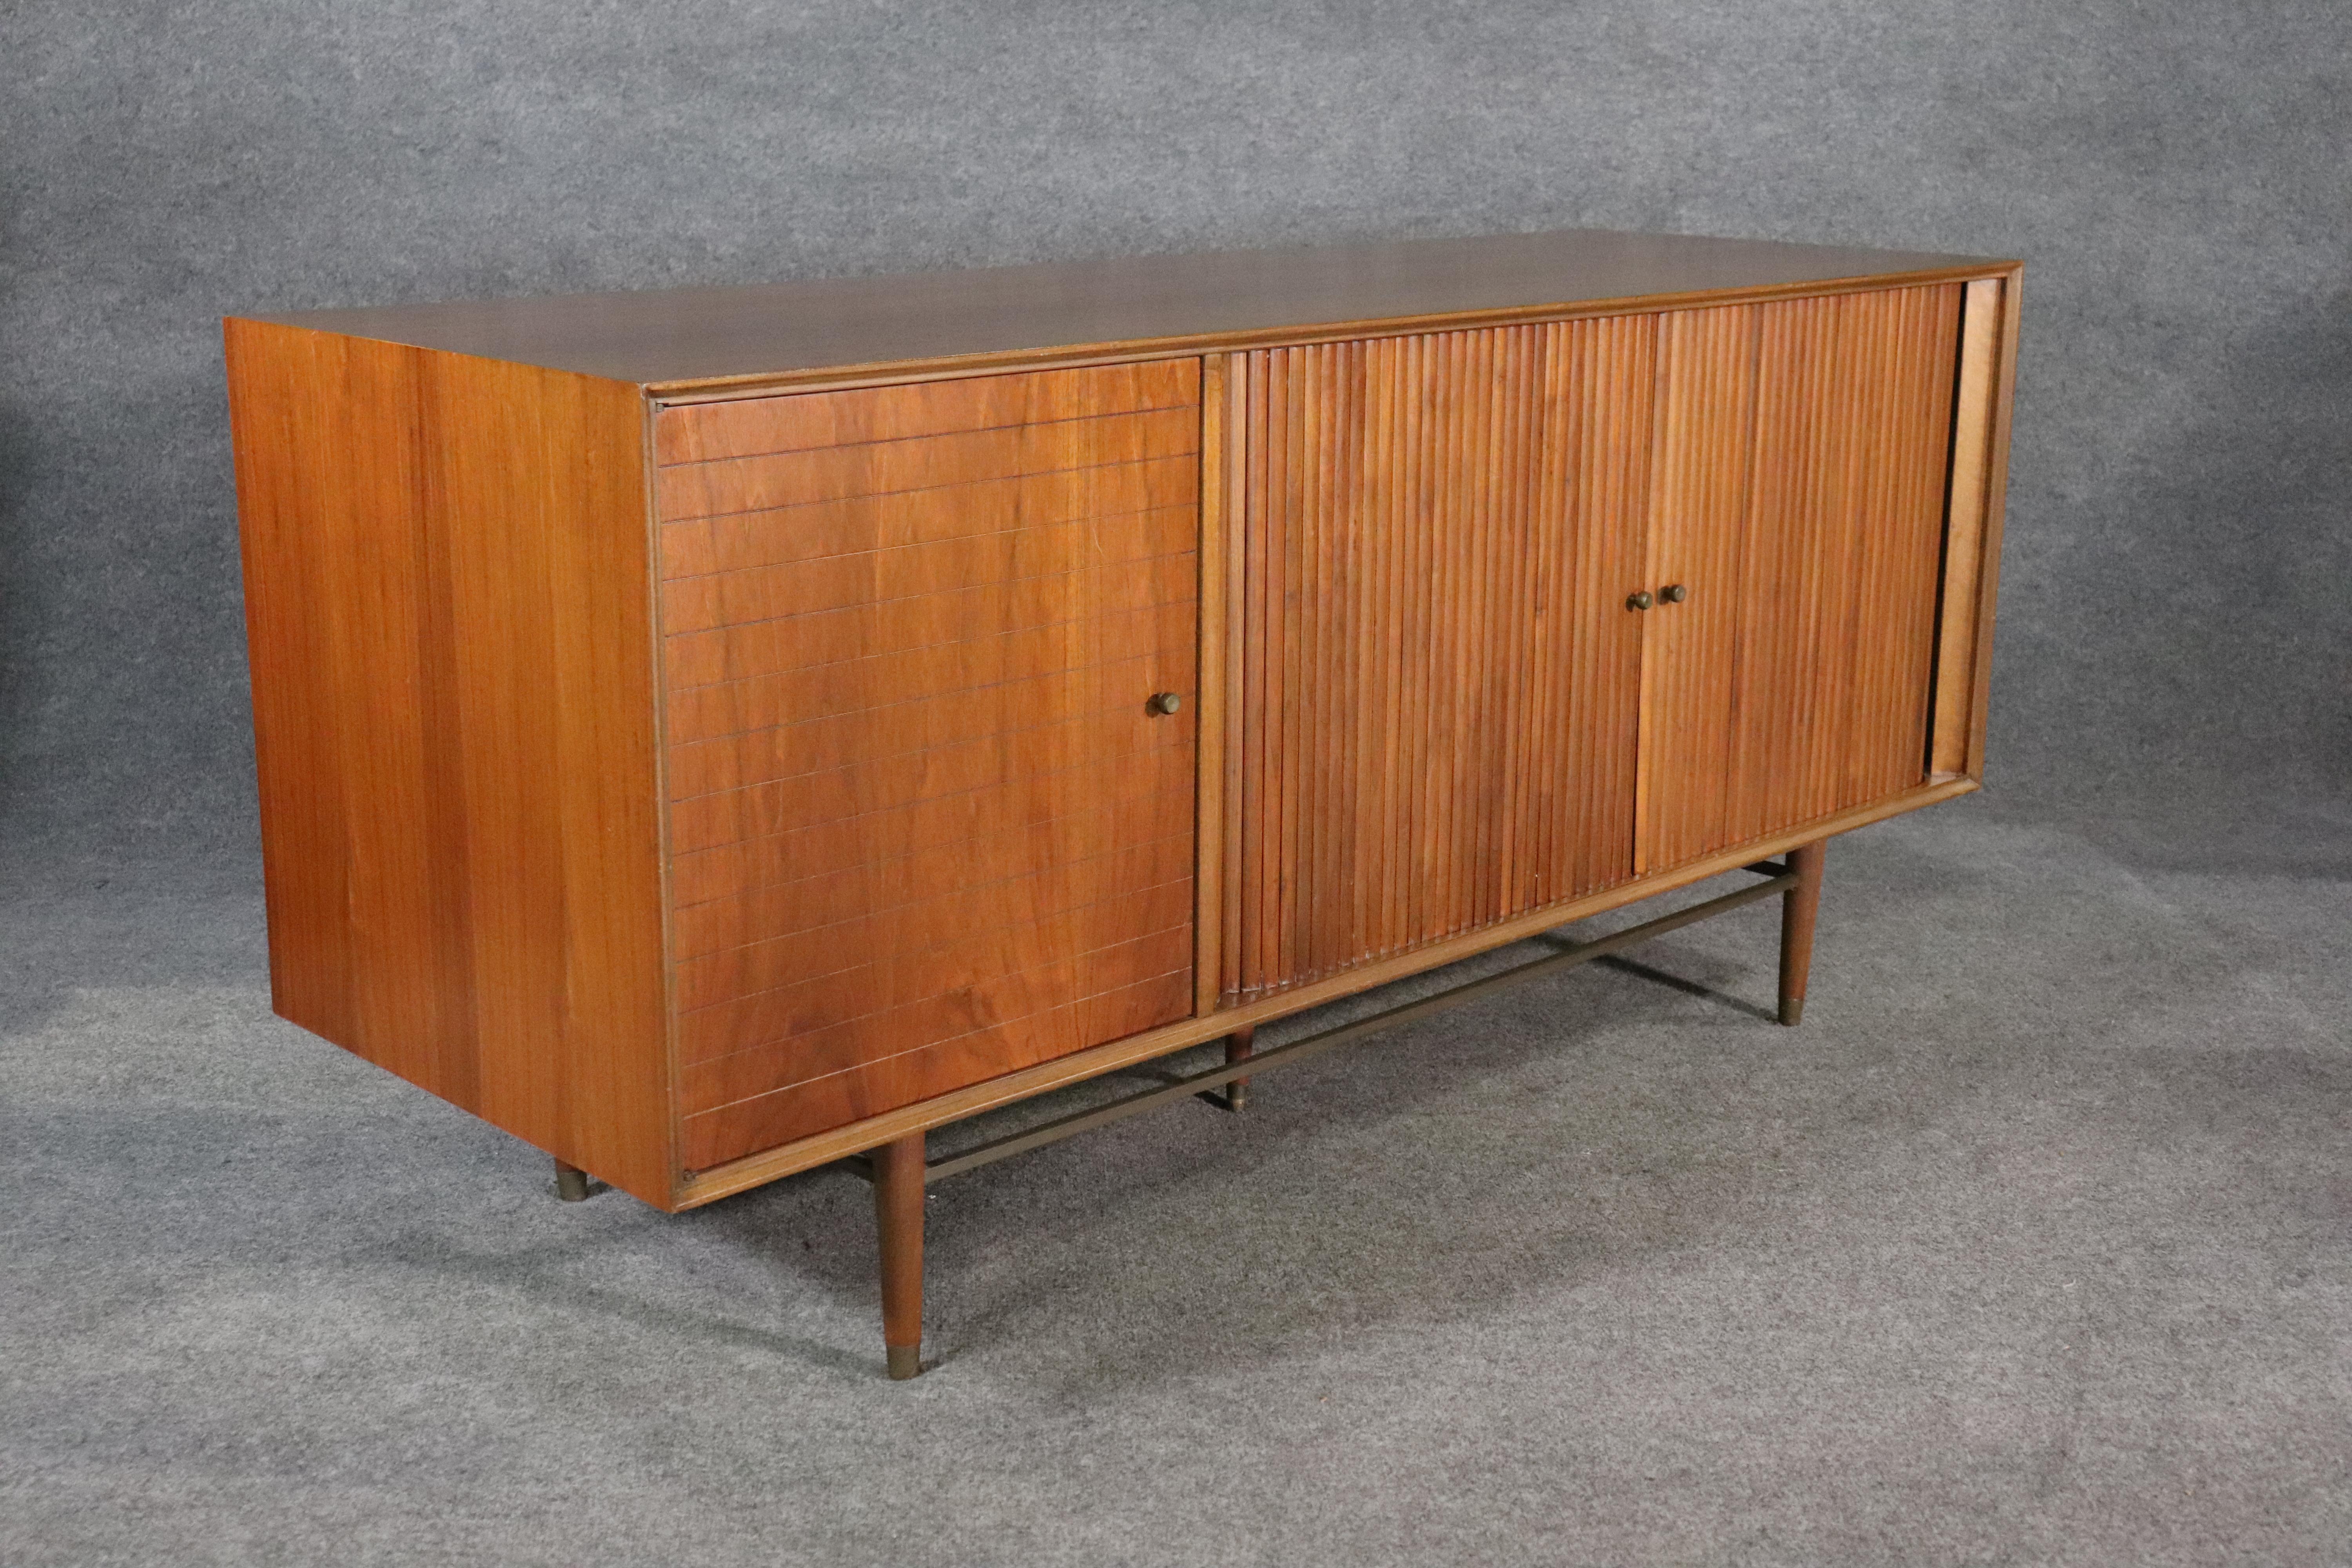 Long mid-century modern credenza with rolling tambour doors, designed by Furst and Fellner for Furnette Inc. Great modern design with walnut grain and accenting brass hardware.
Please confirm location NY or NJ